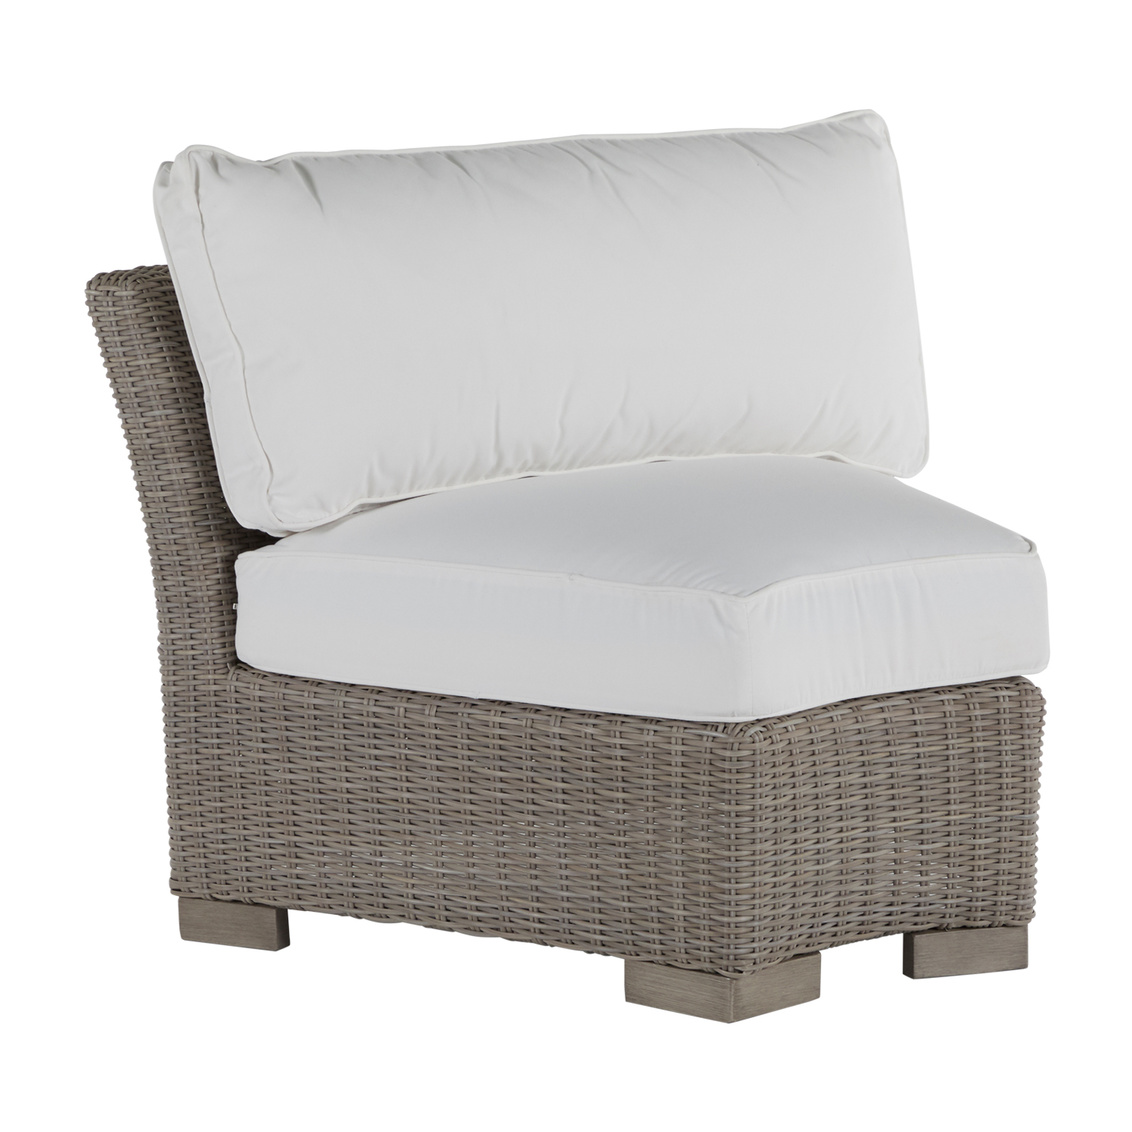 club woven inside round corner chair in oyster – frame only product image